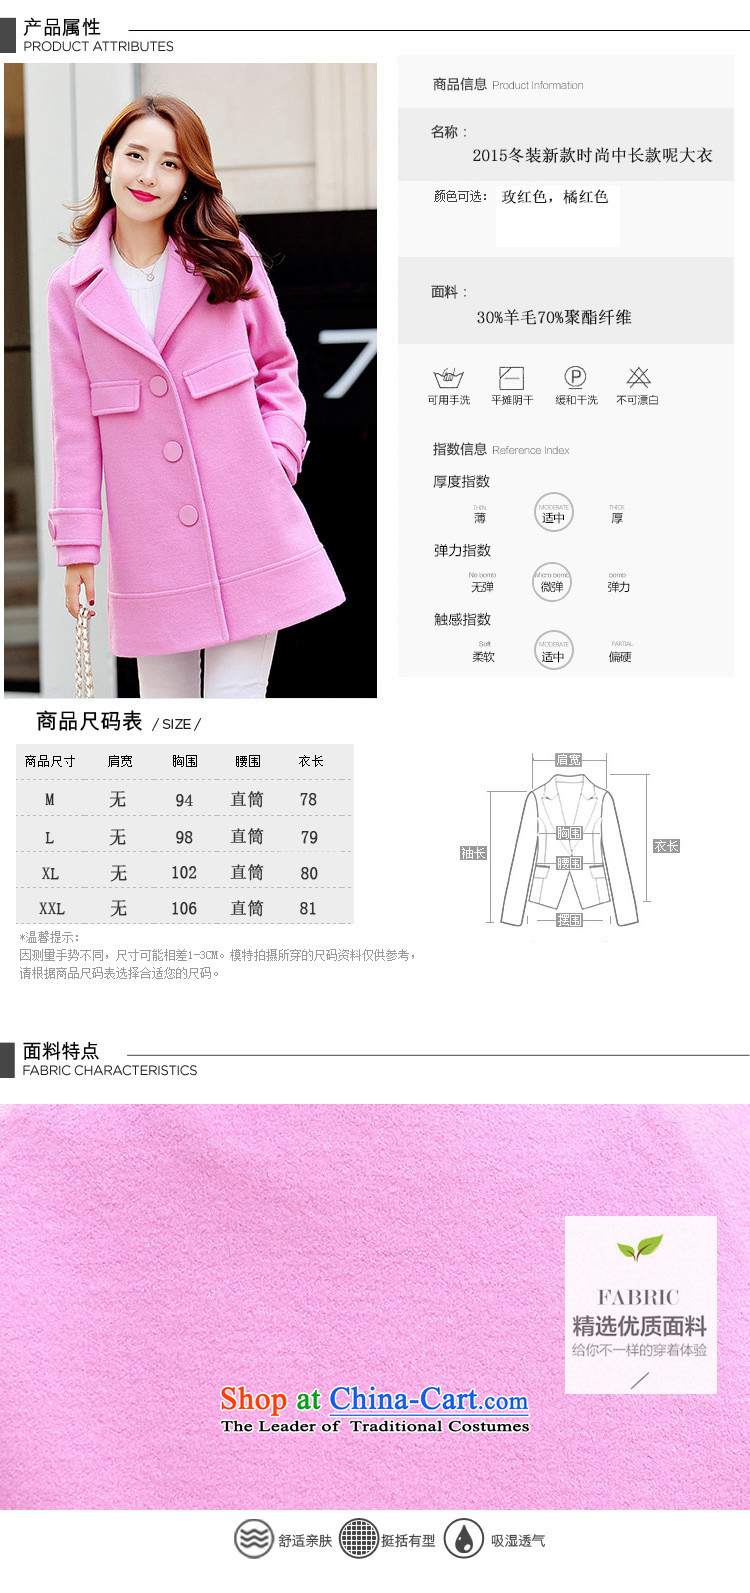 Selina Chow herbs 2015 winter clothing new women's small-Wind Jacket Women? 